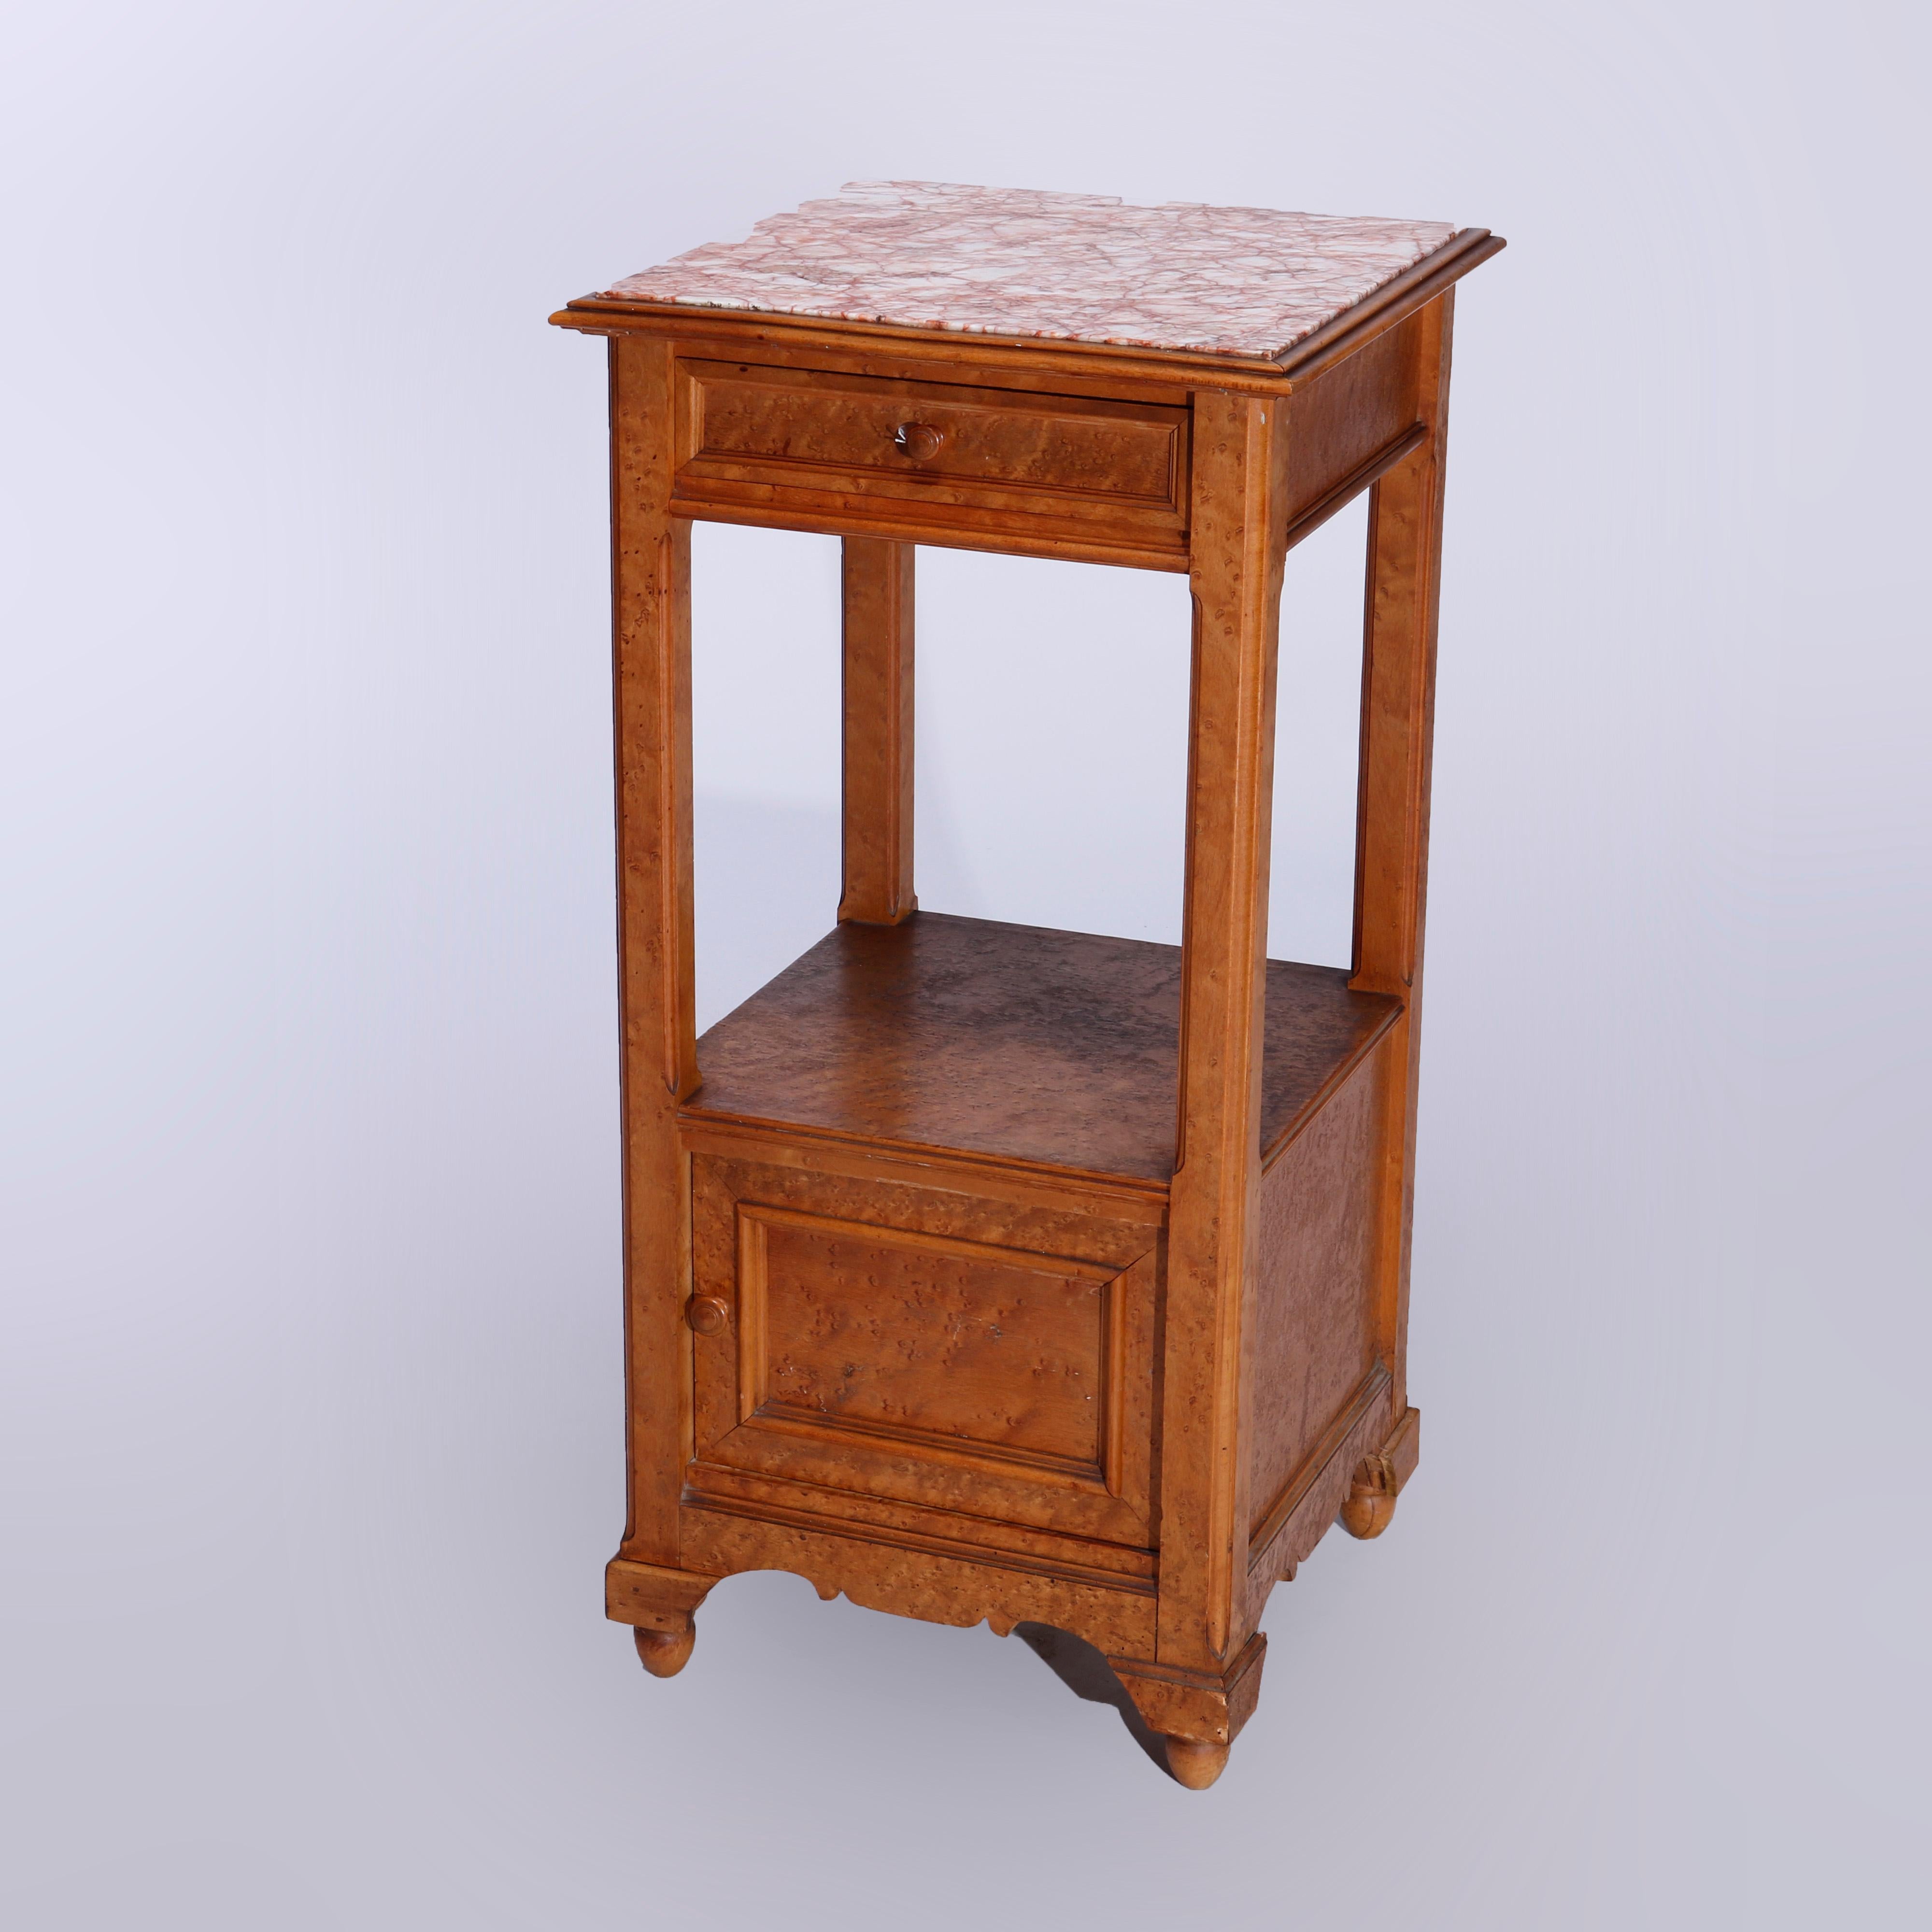 An antique French Renaissance side stand offers inset marble top surmounting birds eye maple frame with single upper drawer over lower shelf and single door cabinet, raised on stylized bracket feet, c1900

Measures - 33.5'' H x 16.5'' W x 16.5'' D.